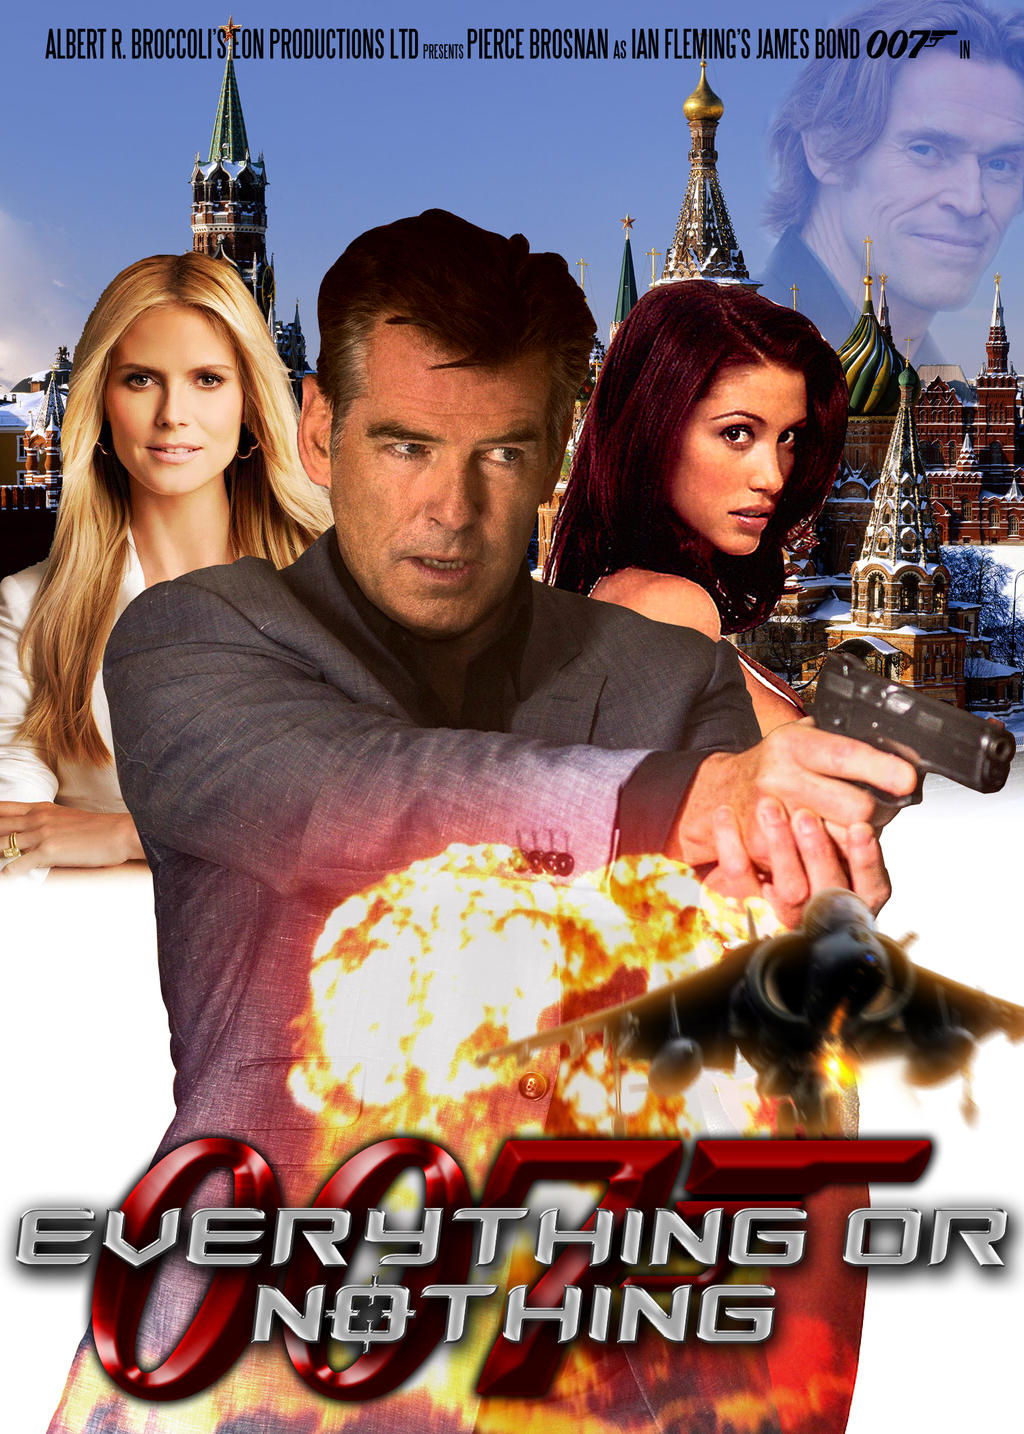 007_everything_or_nothing_movie_poster_by_comandercool22-d8i0w28.jpg